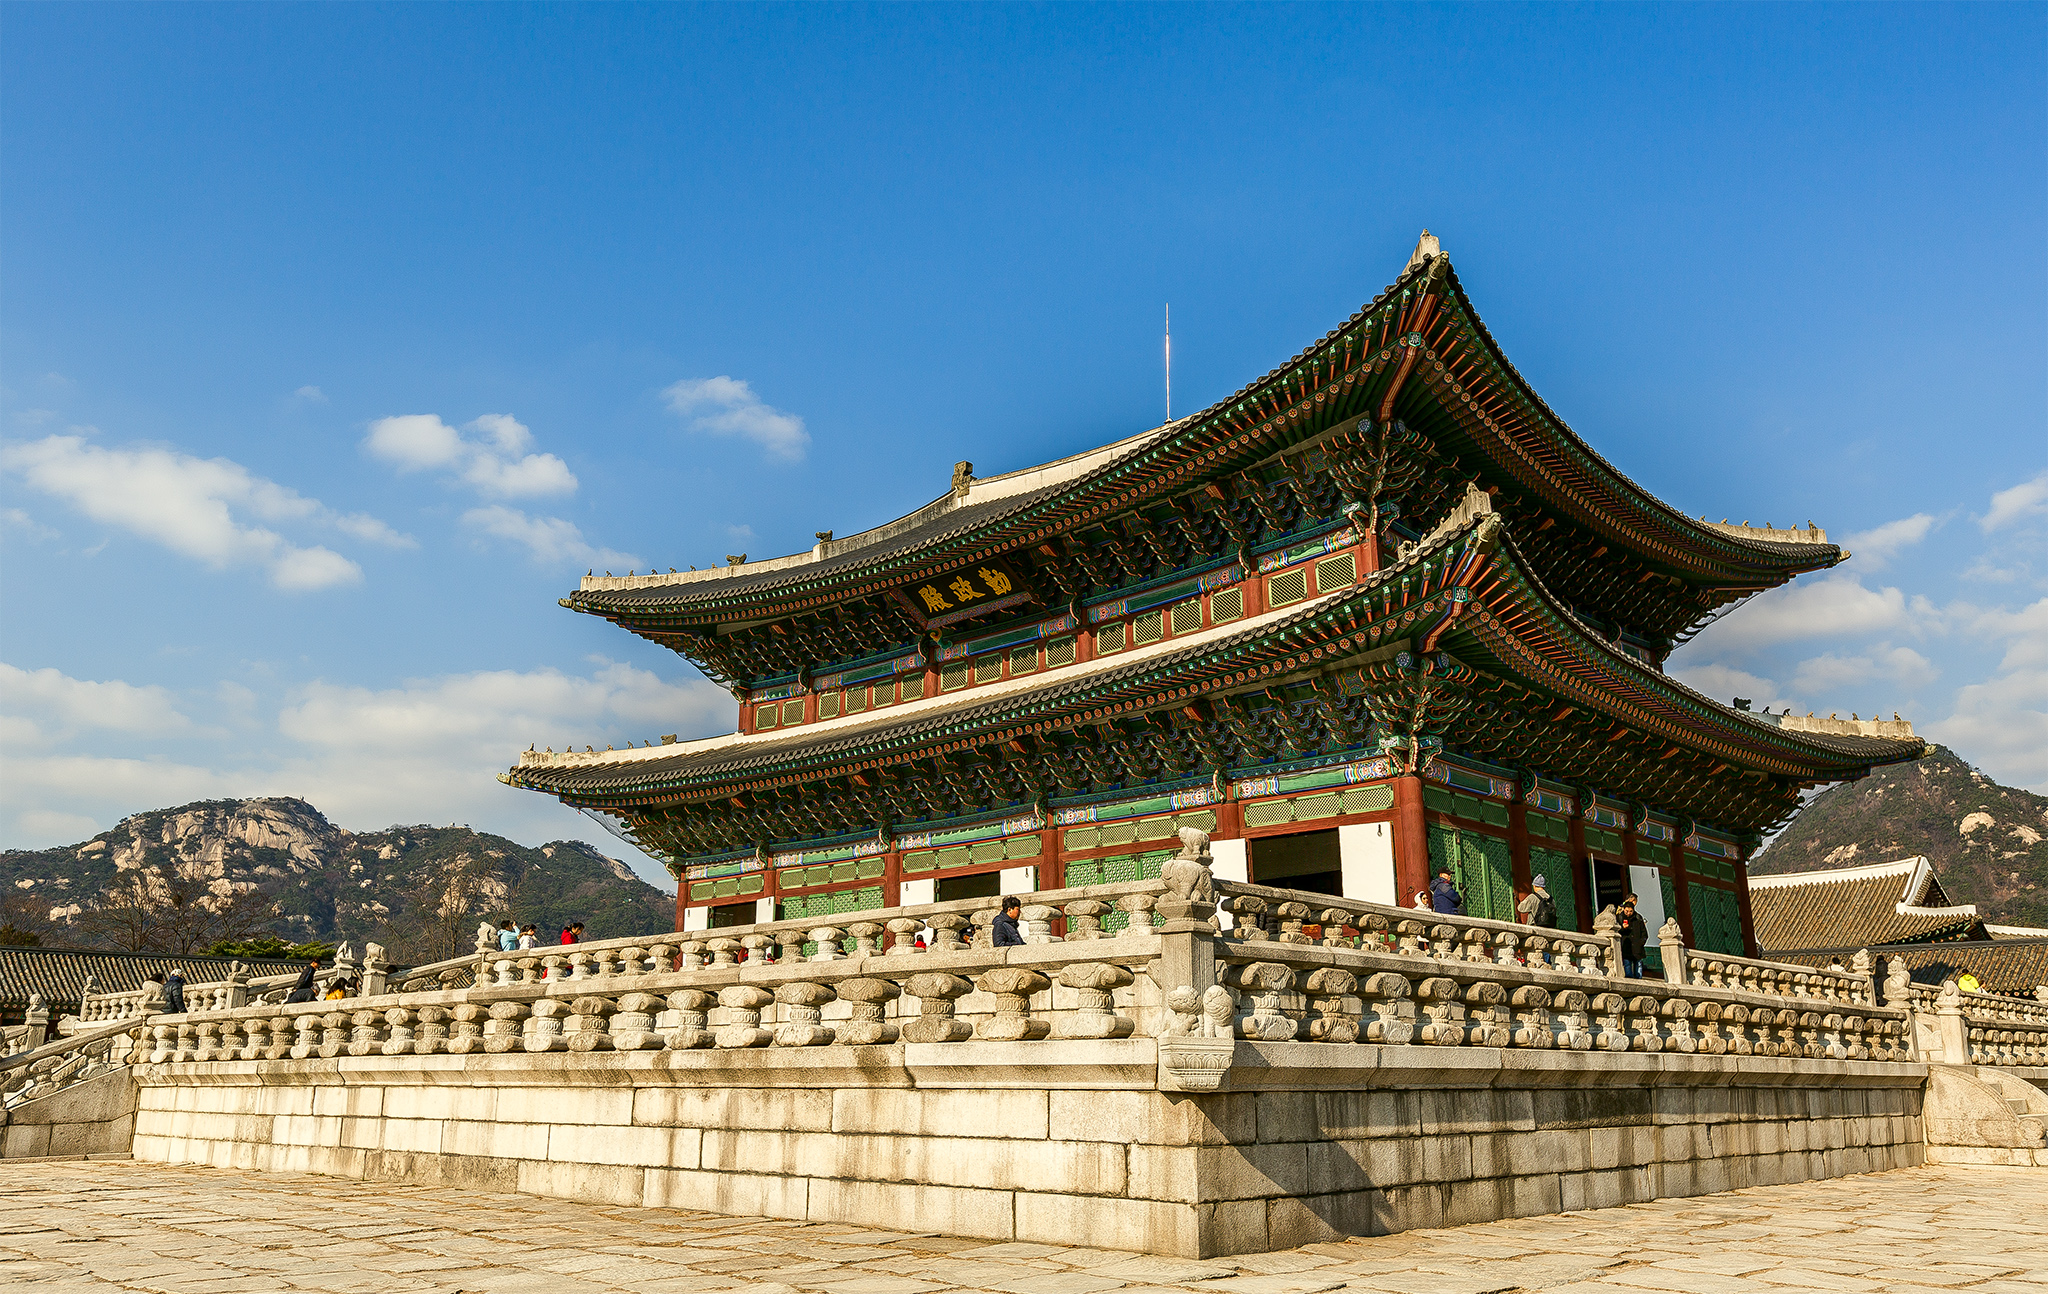 21 Best Things to Do in Seoul - What is Seoul Most Famous For? - Go Guides